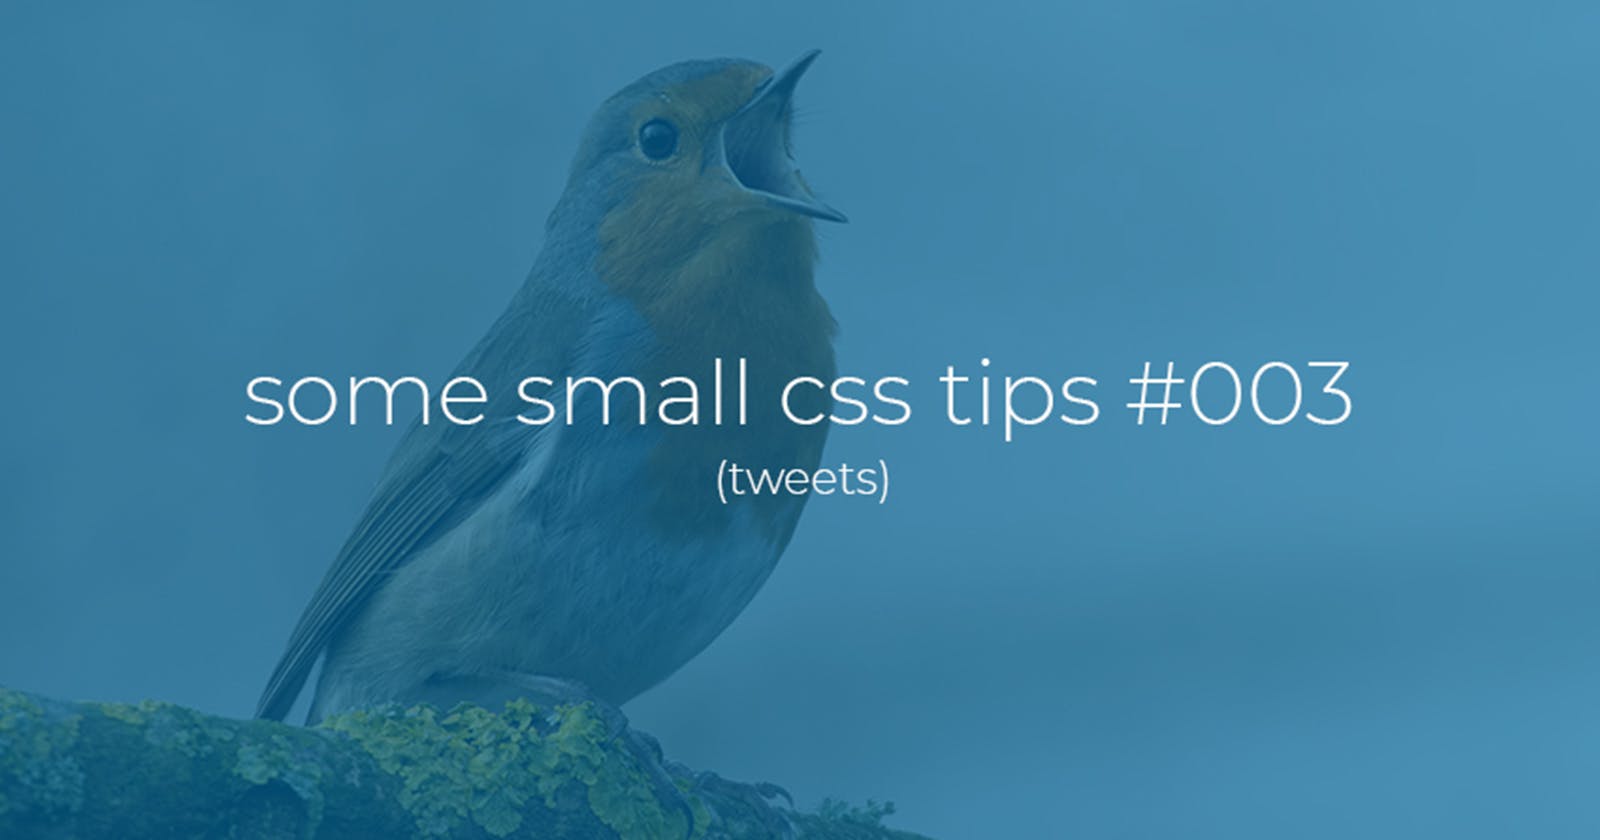 Some small css tips #003